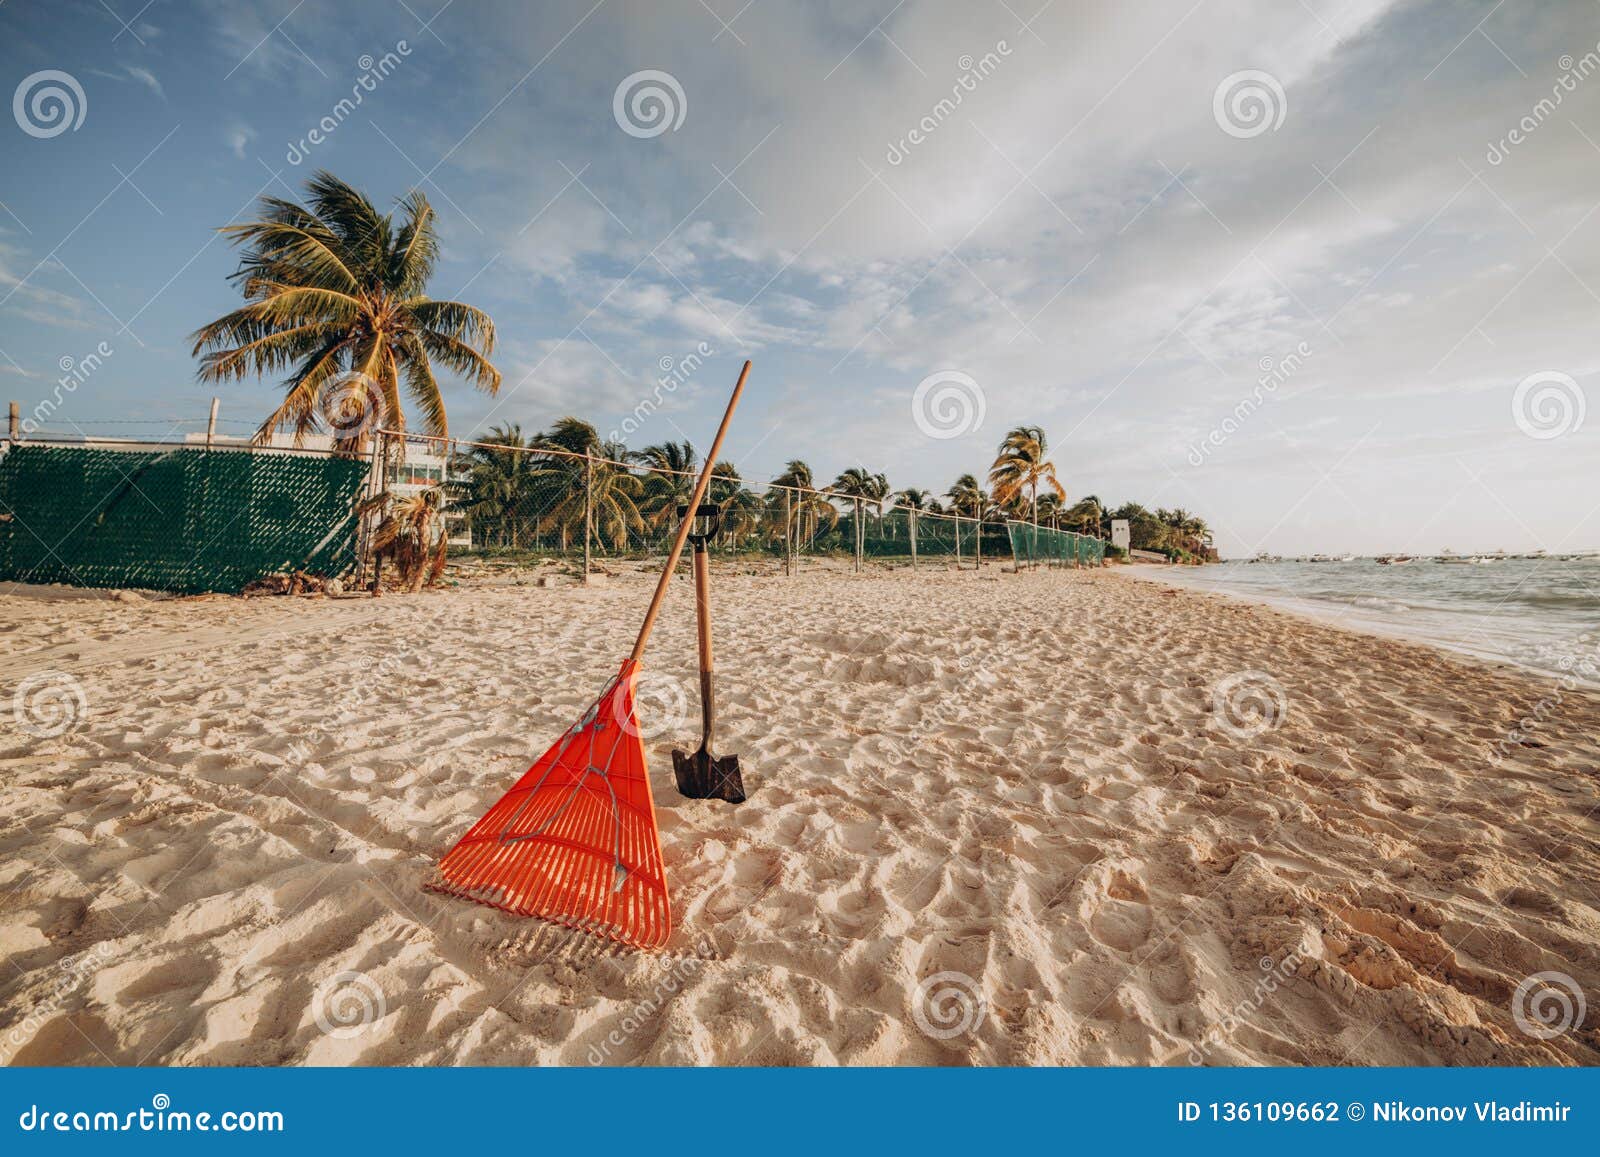 Tools for Cleaning the Beach. Rake and Shovel on Sand Stock Photo